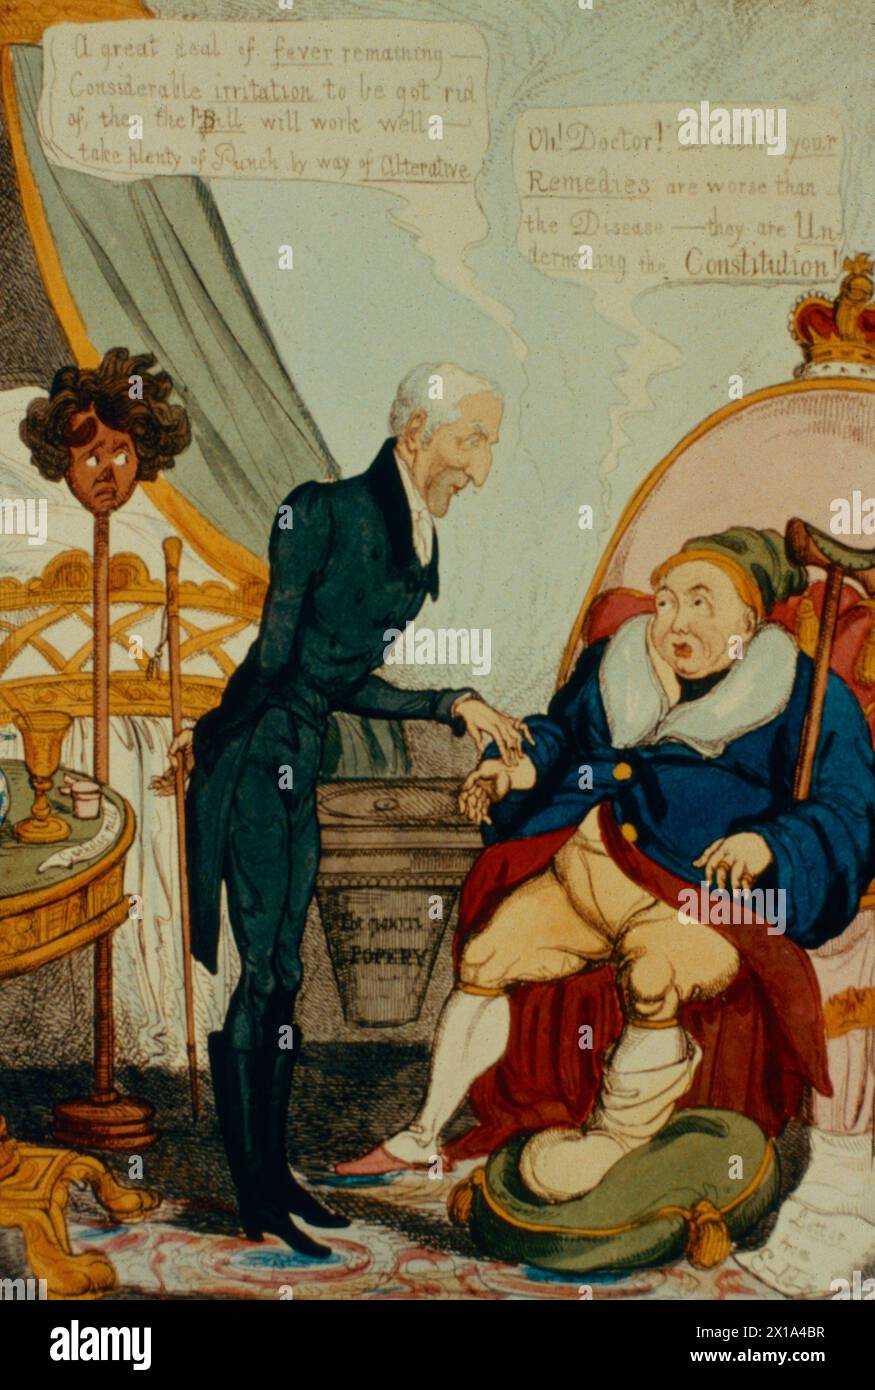 John Bull and the Doctor, British cartoon about King George IV and Wellington, illustration, 19th century Stock Photo